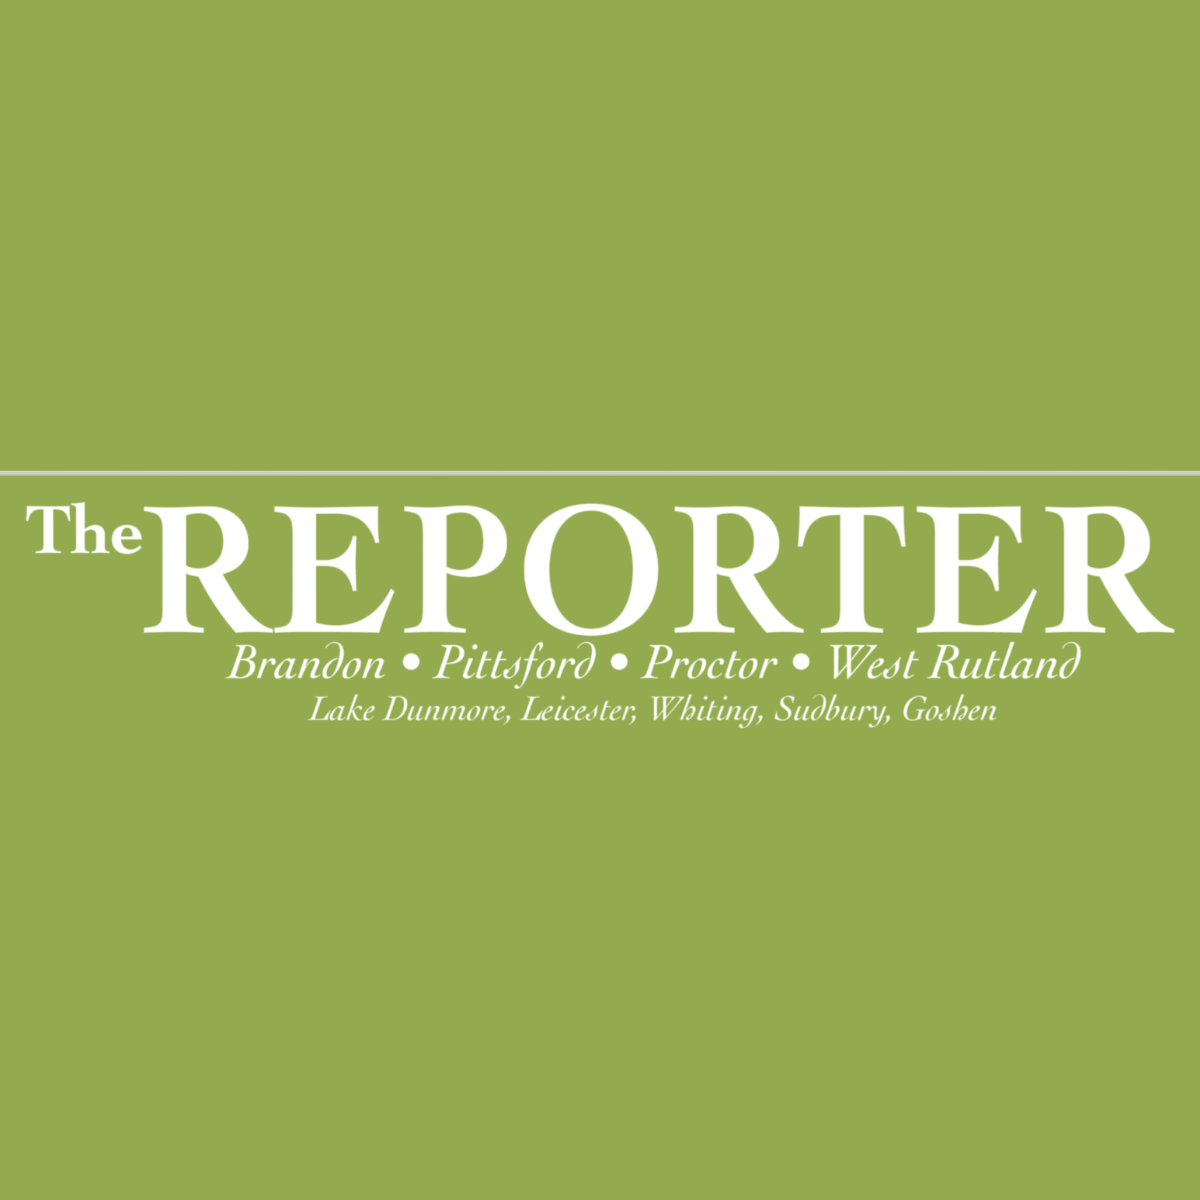 Letter to the Editor: Looking for input from you